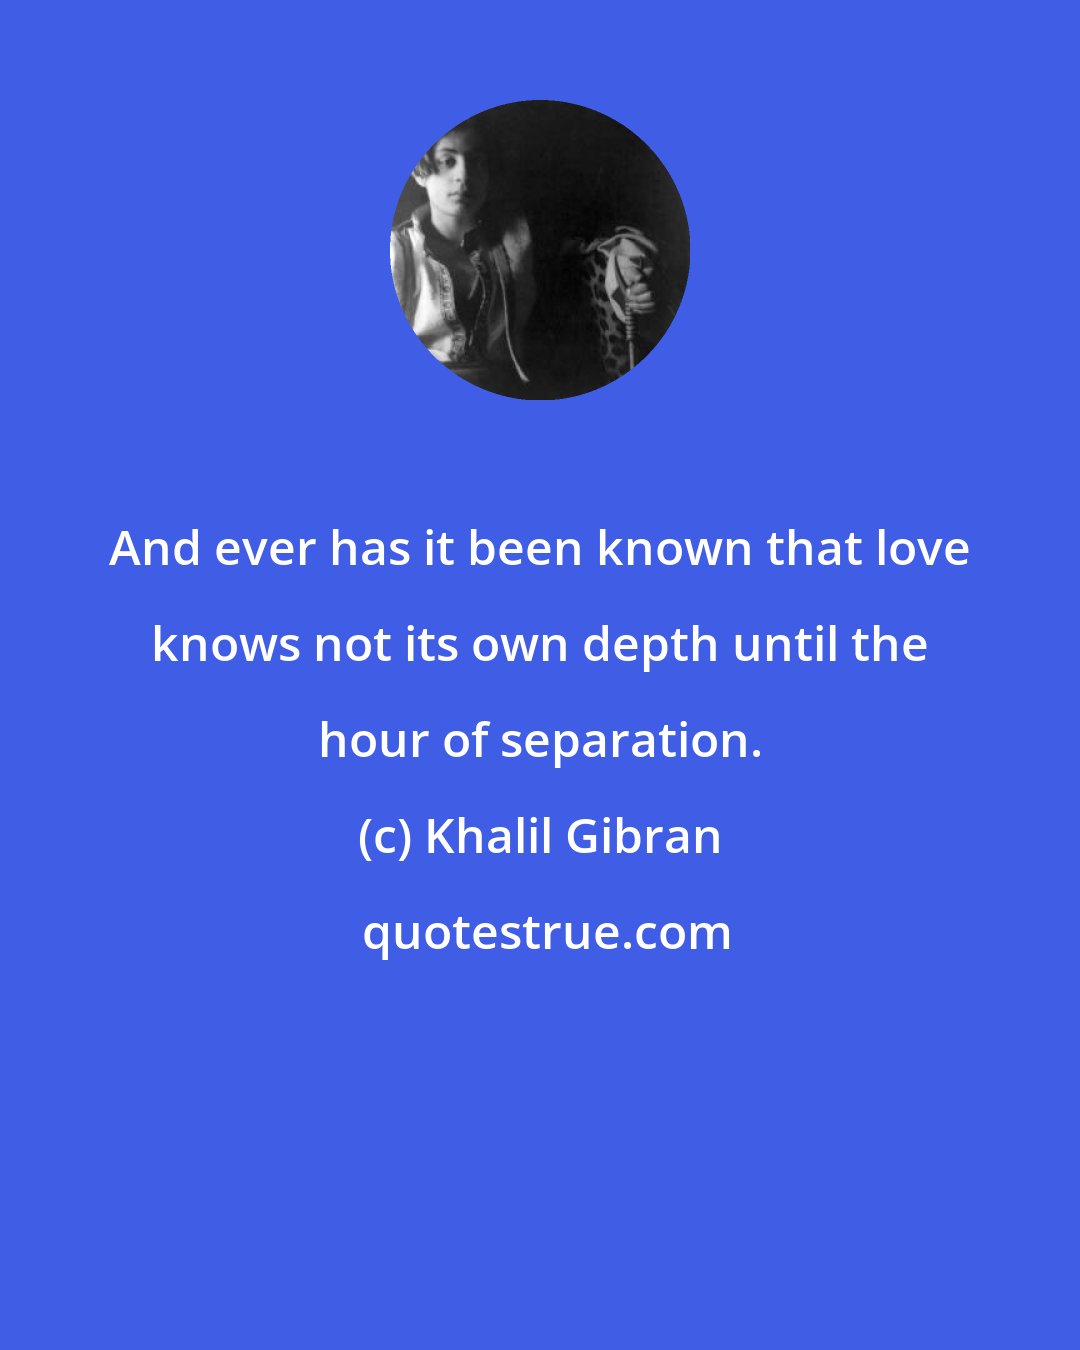 Khalil Gibran: And ever has it been known that love knows not its own depth until the hour of separation.